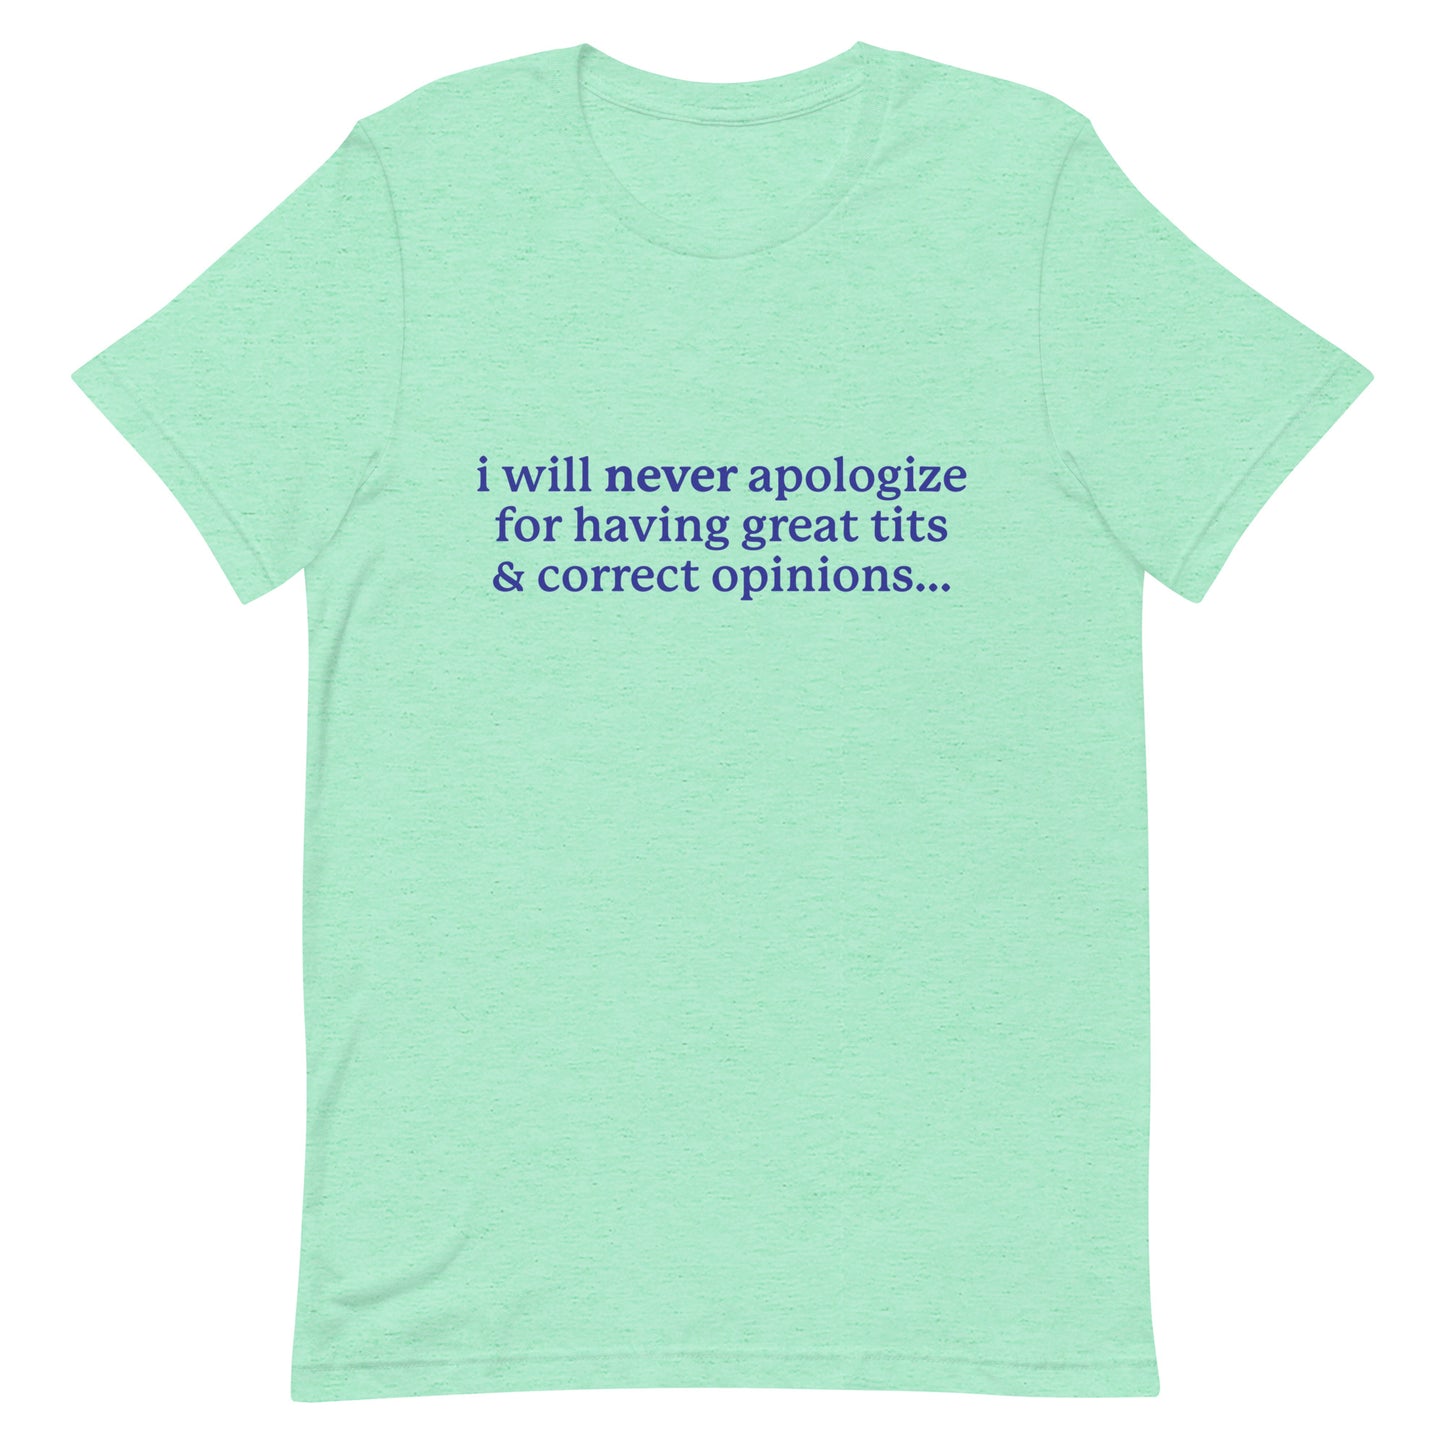 I Will Never Apologize (Great Tits & Correct Opinions) Unisex t-shirt